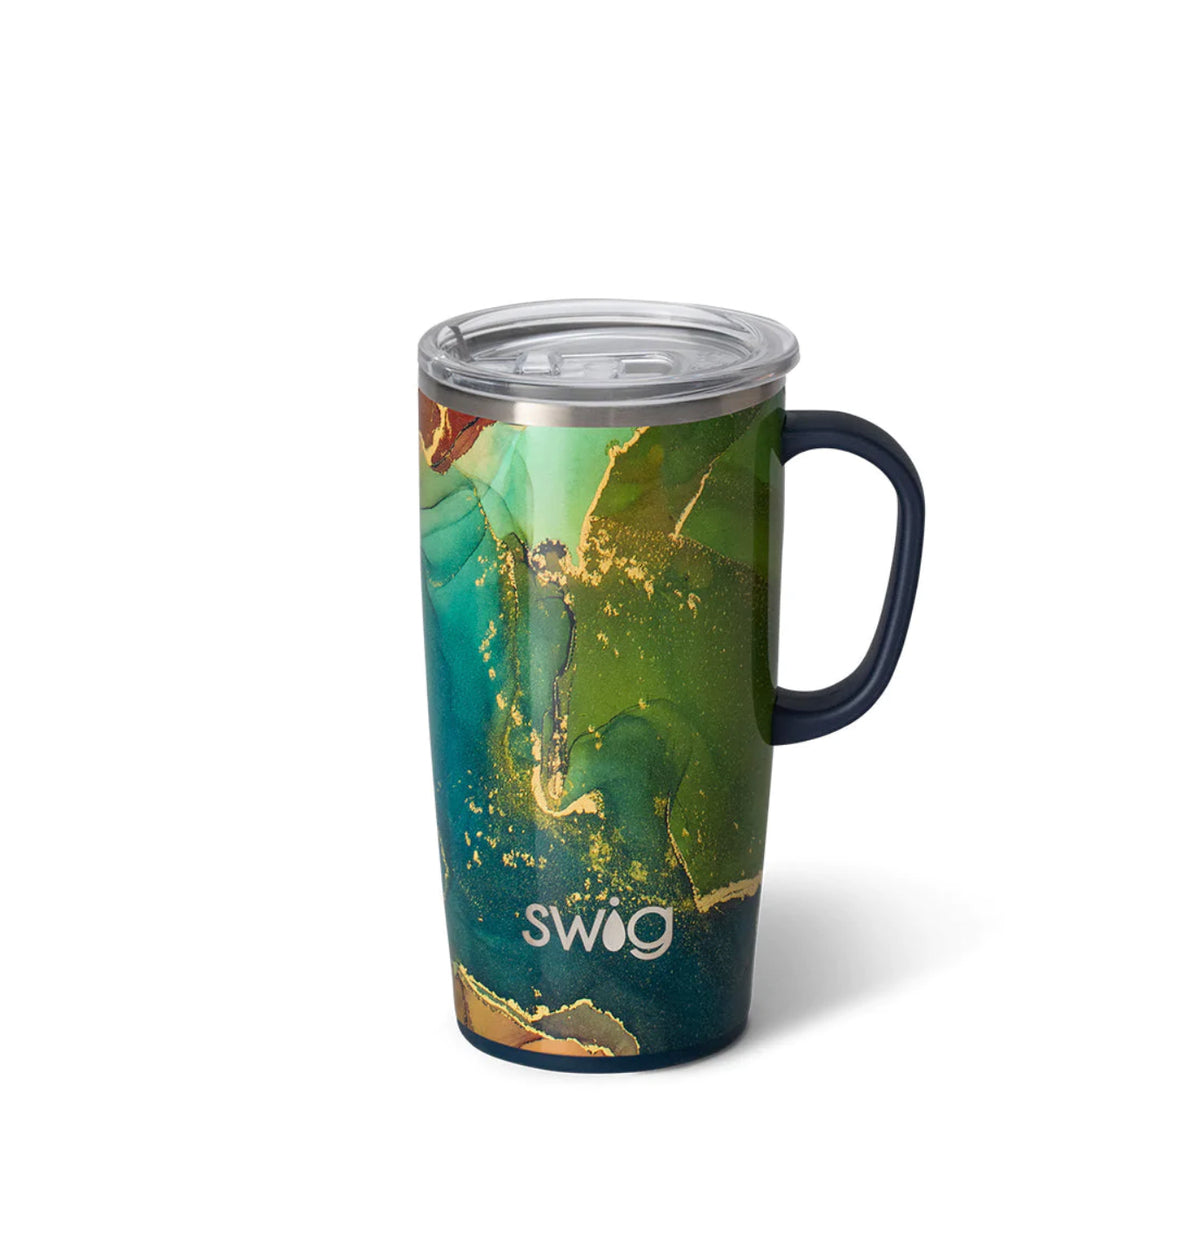 https://www.vickiesgifts.shop/wp-content/uploads/1691/47/the-riverstone-travel-mug-22oz-swig-brand-provides-great-value-for-the-money_0.jpg